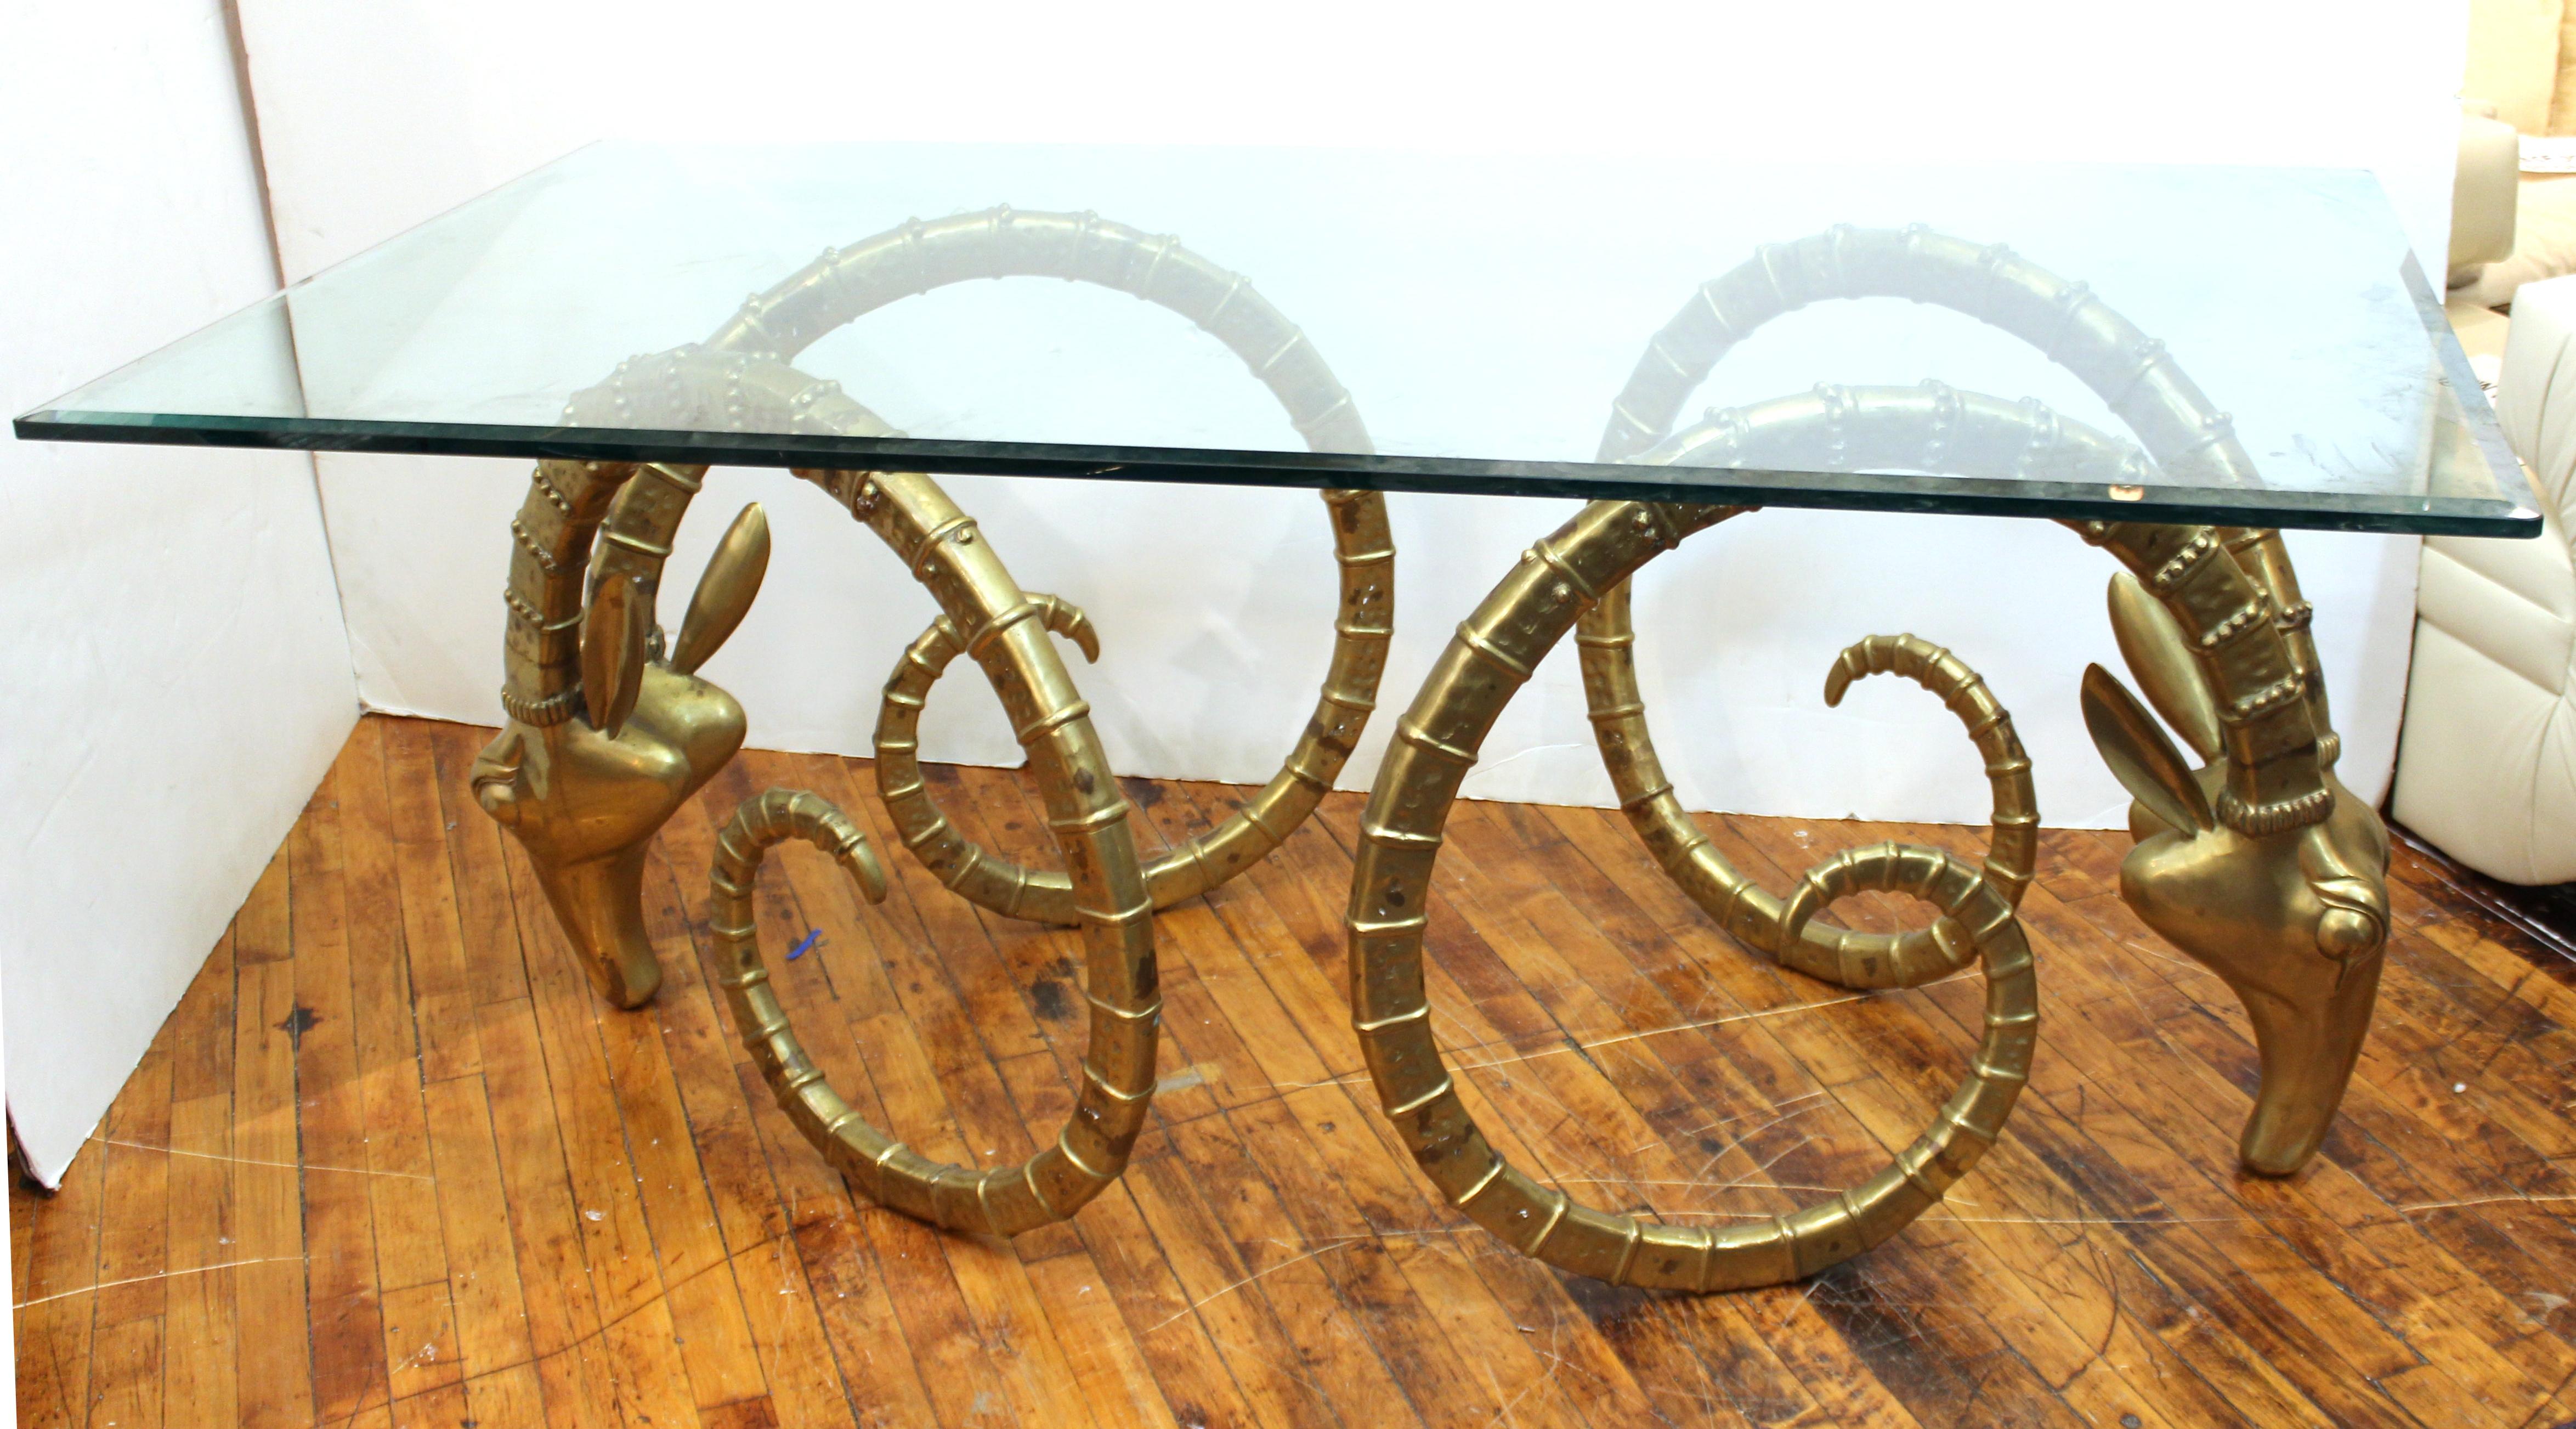 Hollywood Regency brass ibex head dining table with thick glass top, attributed to Alain Chervet. The heads have age-appropriate patina and some tarnish in a few spots, but overall in great vintage condition.